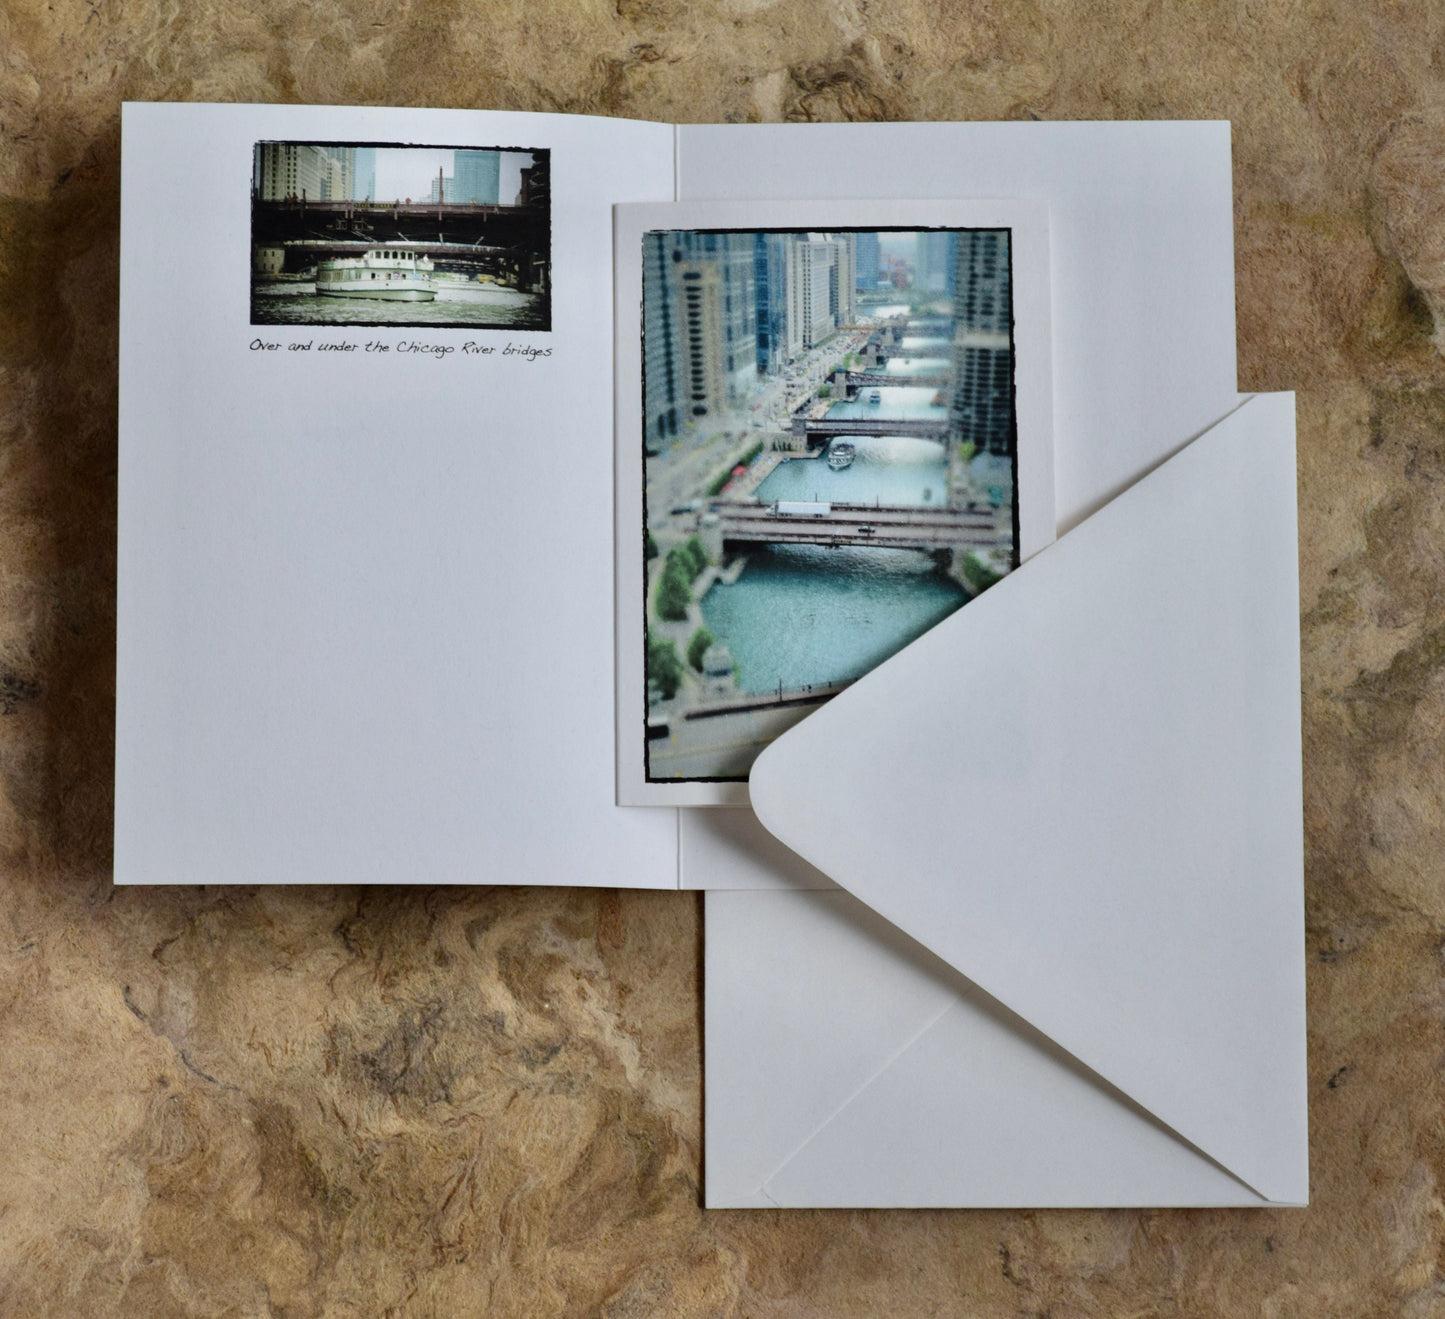 Chicago Greeting Cards - Eco-Friendly, Hand Printed Cards of Chicago